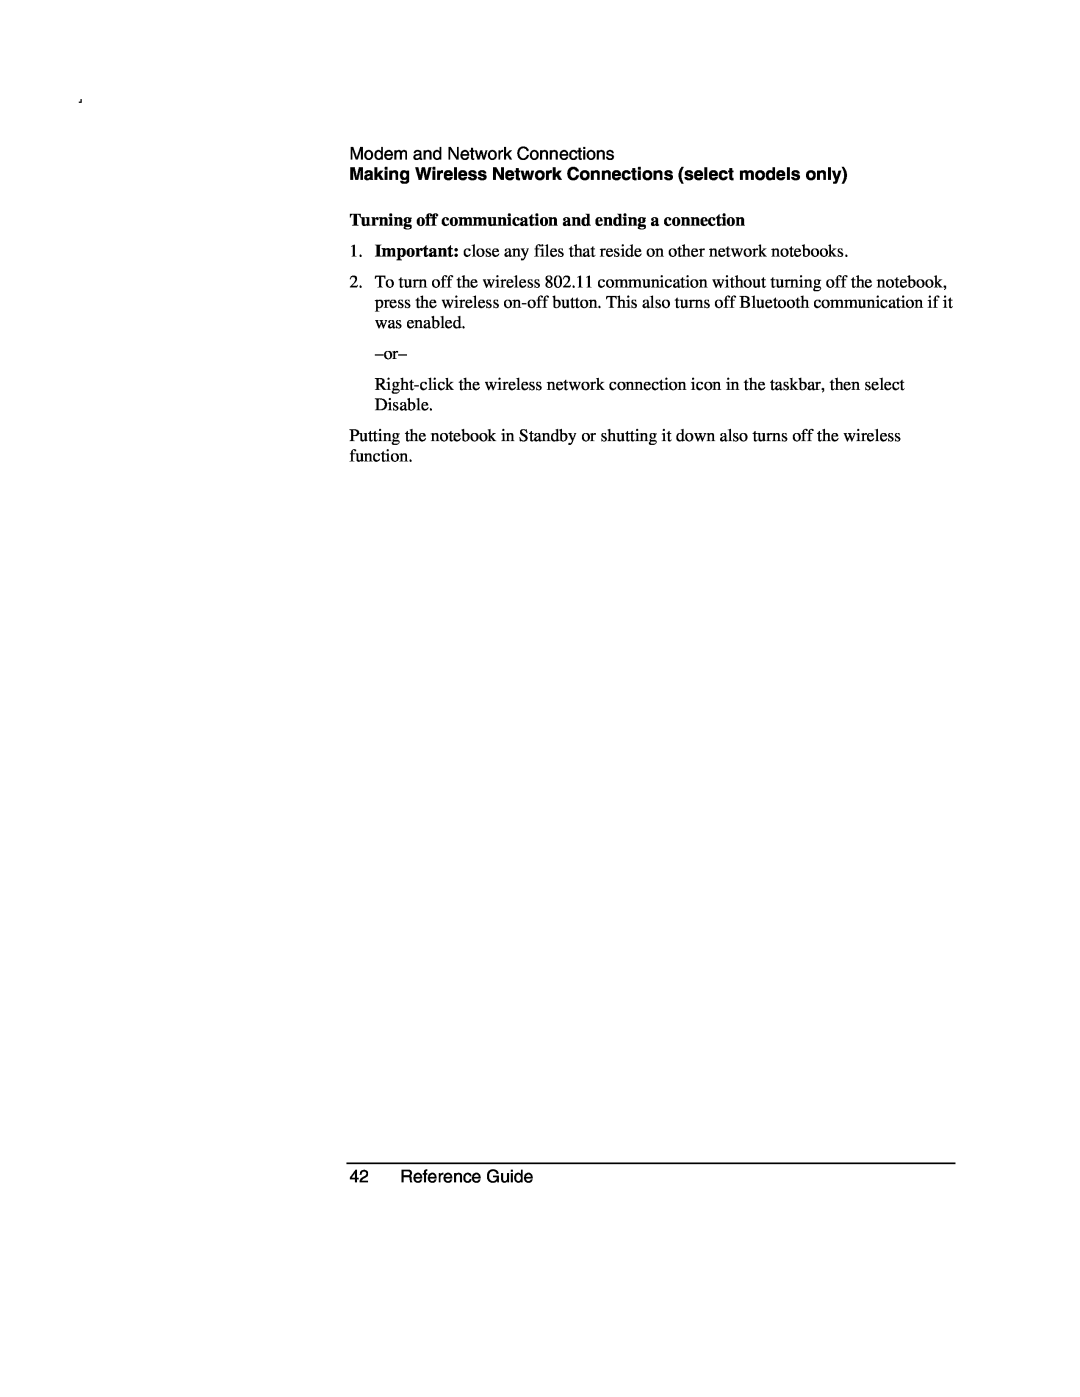 Compaq AMC20493-KT5 manual Turning off communication and ending a connection 